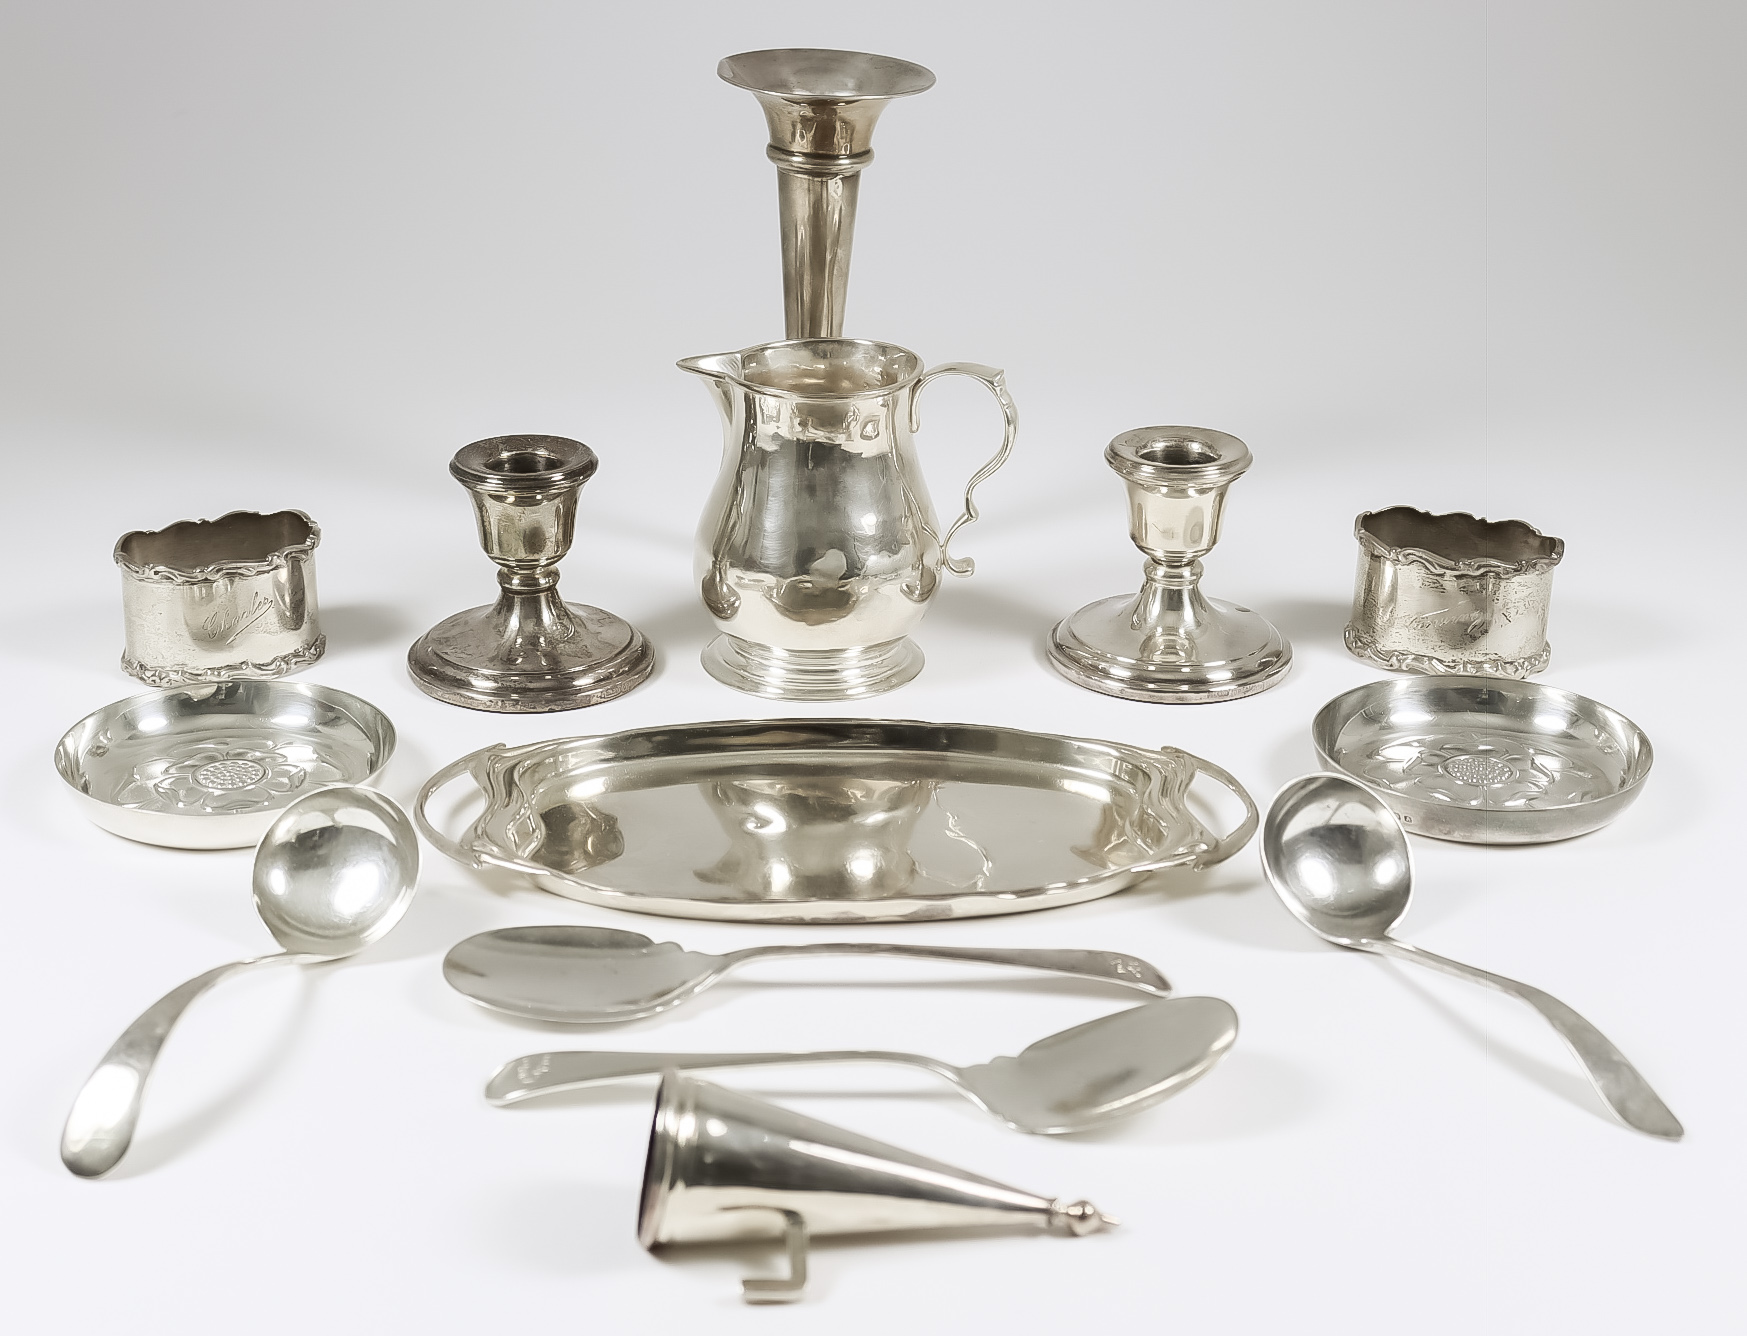 A George III Silver Cream Jug, a Pair of Elizabeth II Silver Circular Dishes, and mixed